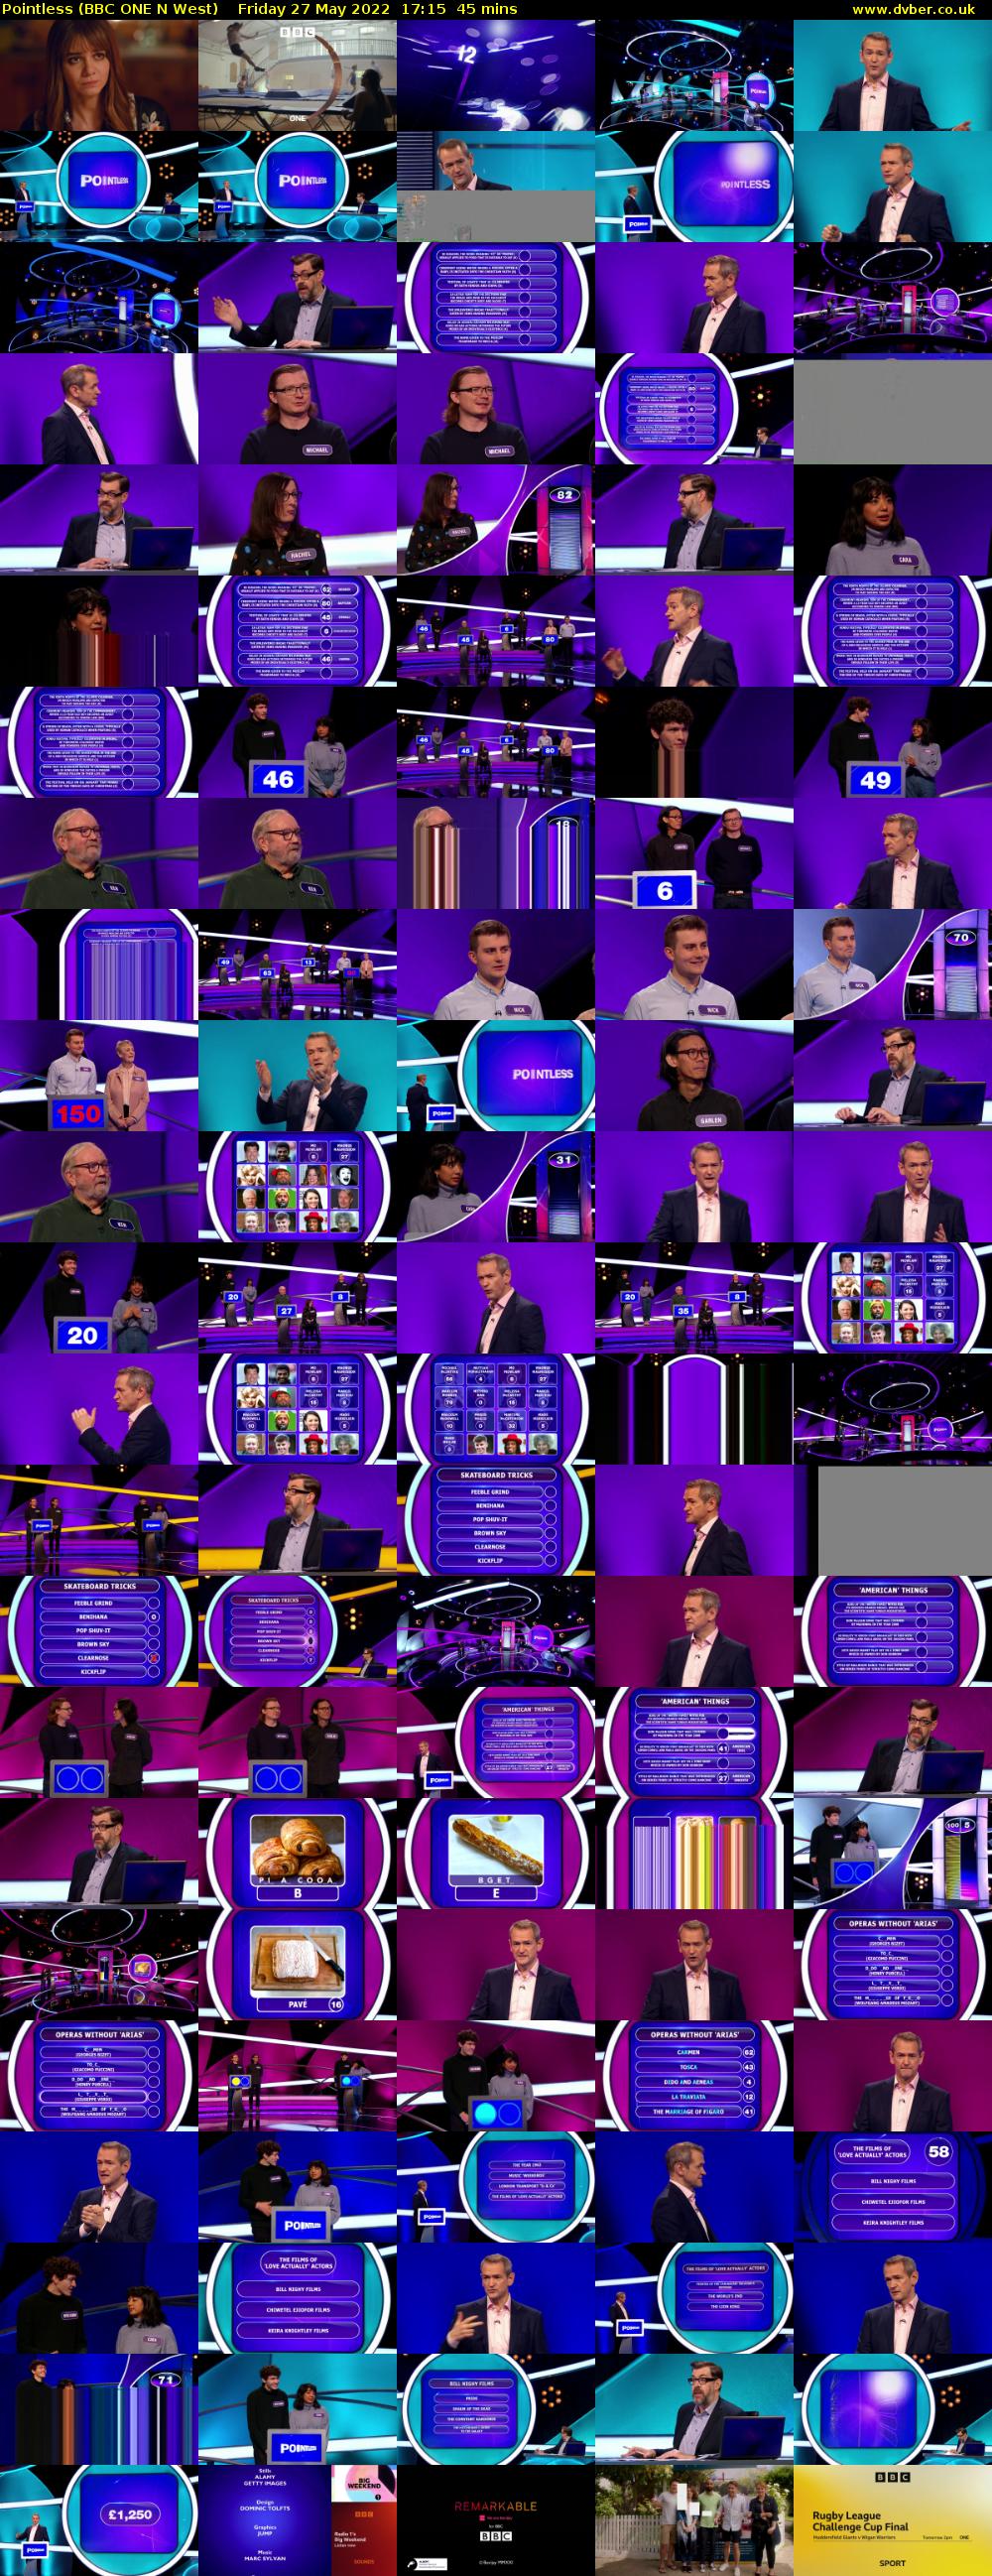 Pointless (BBC ONE N West) Friday 27 May 2022 17:15 - 18:00